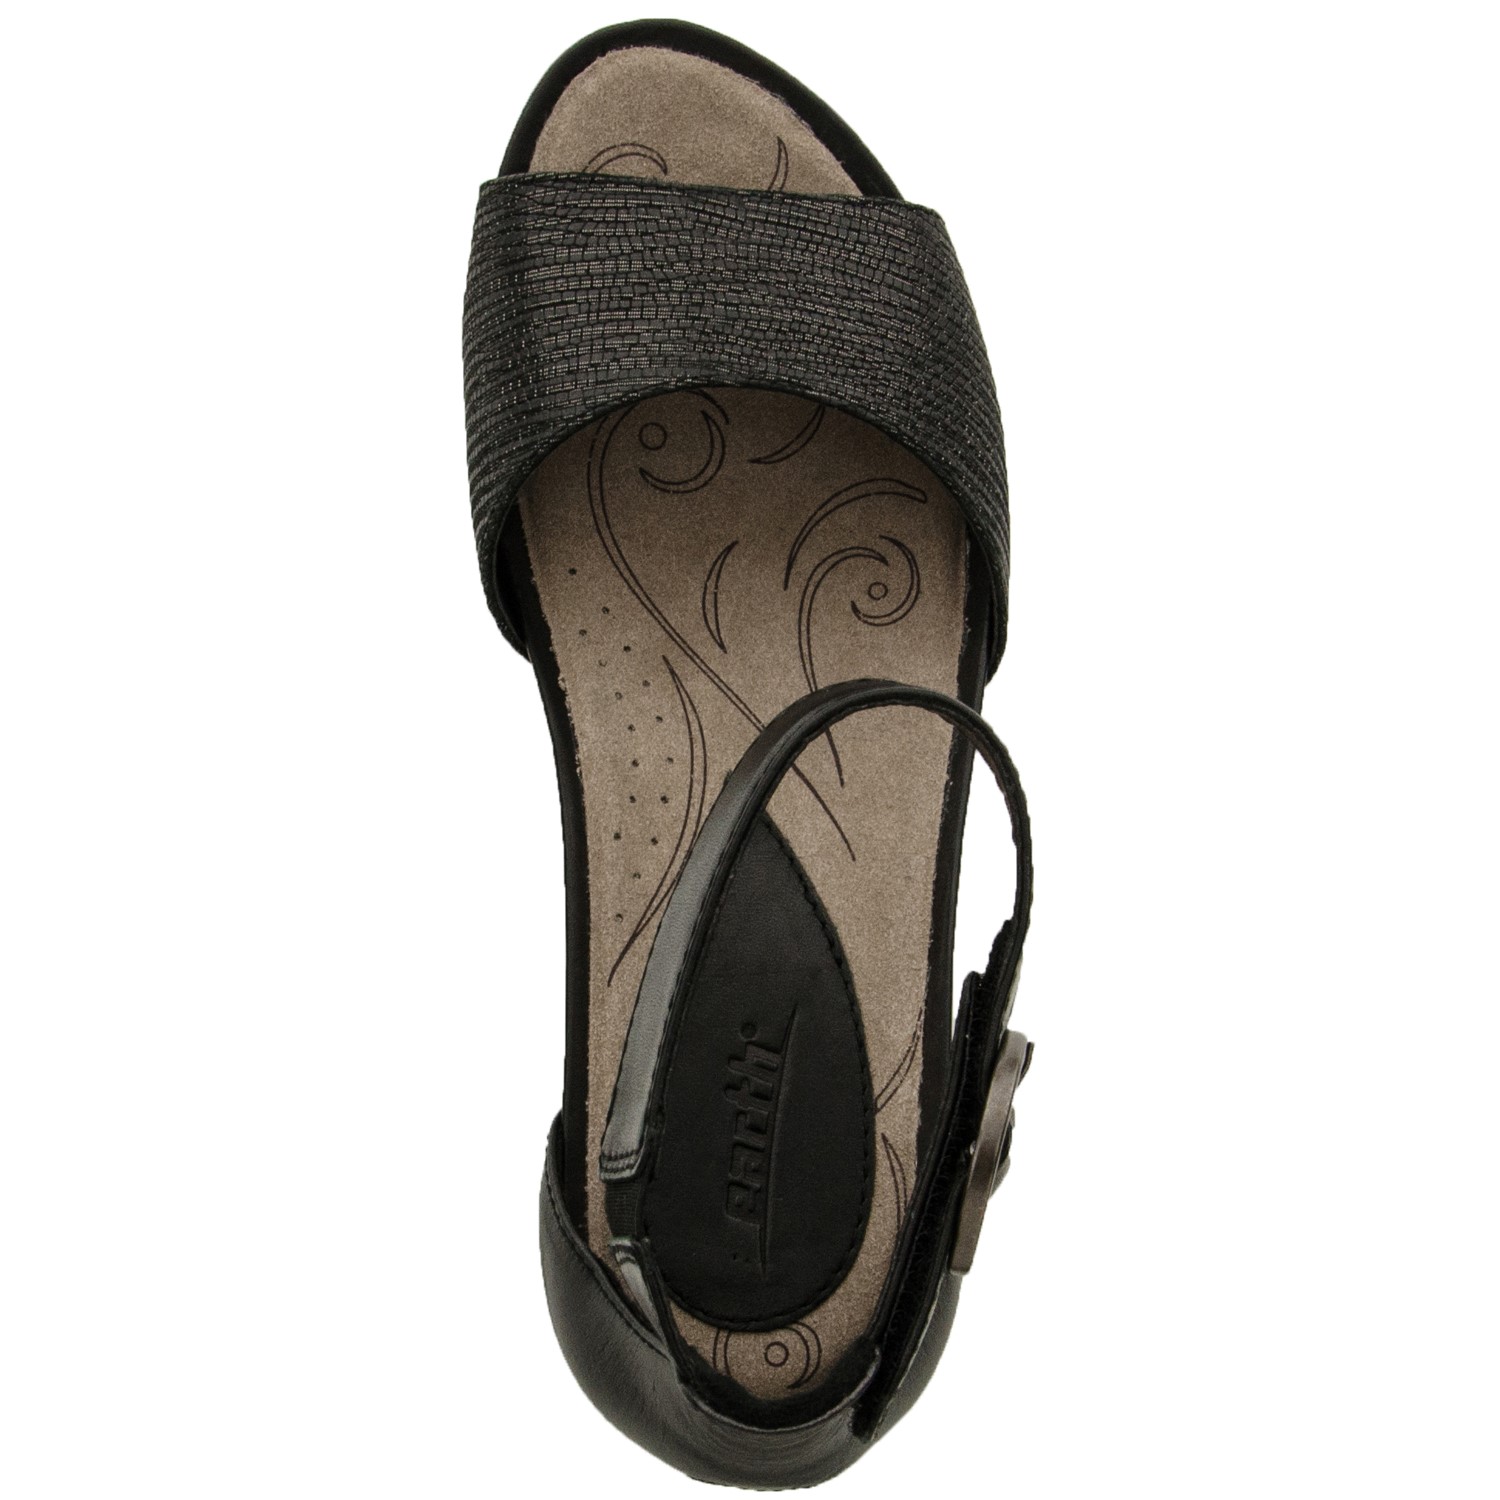 earth shoes hera champagne